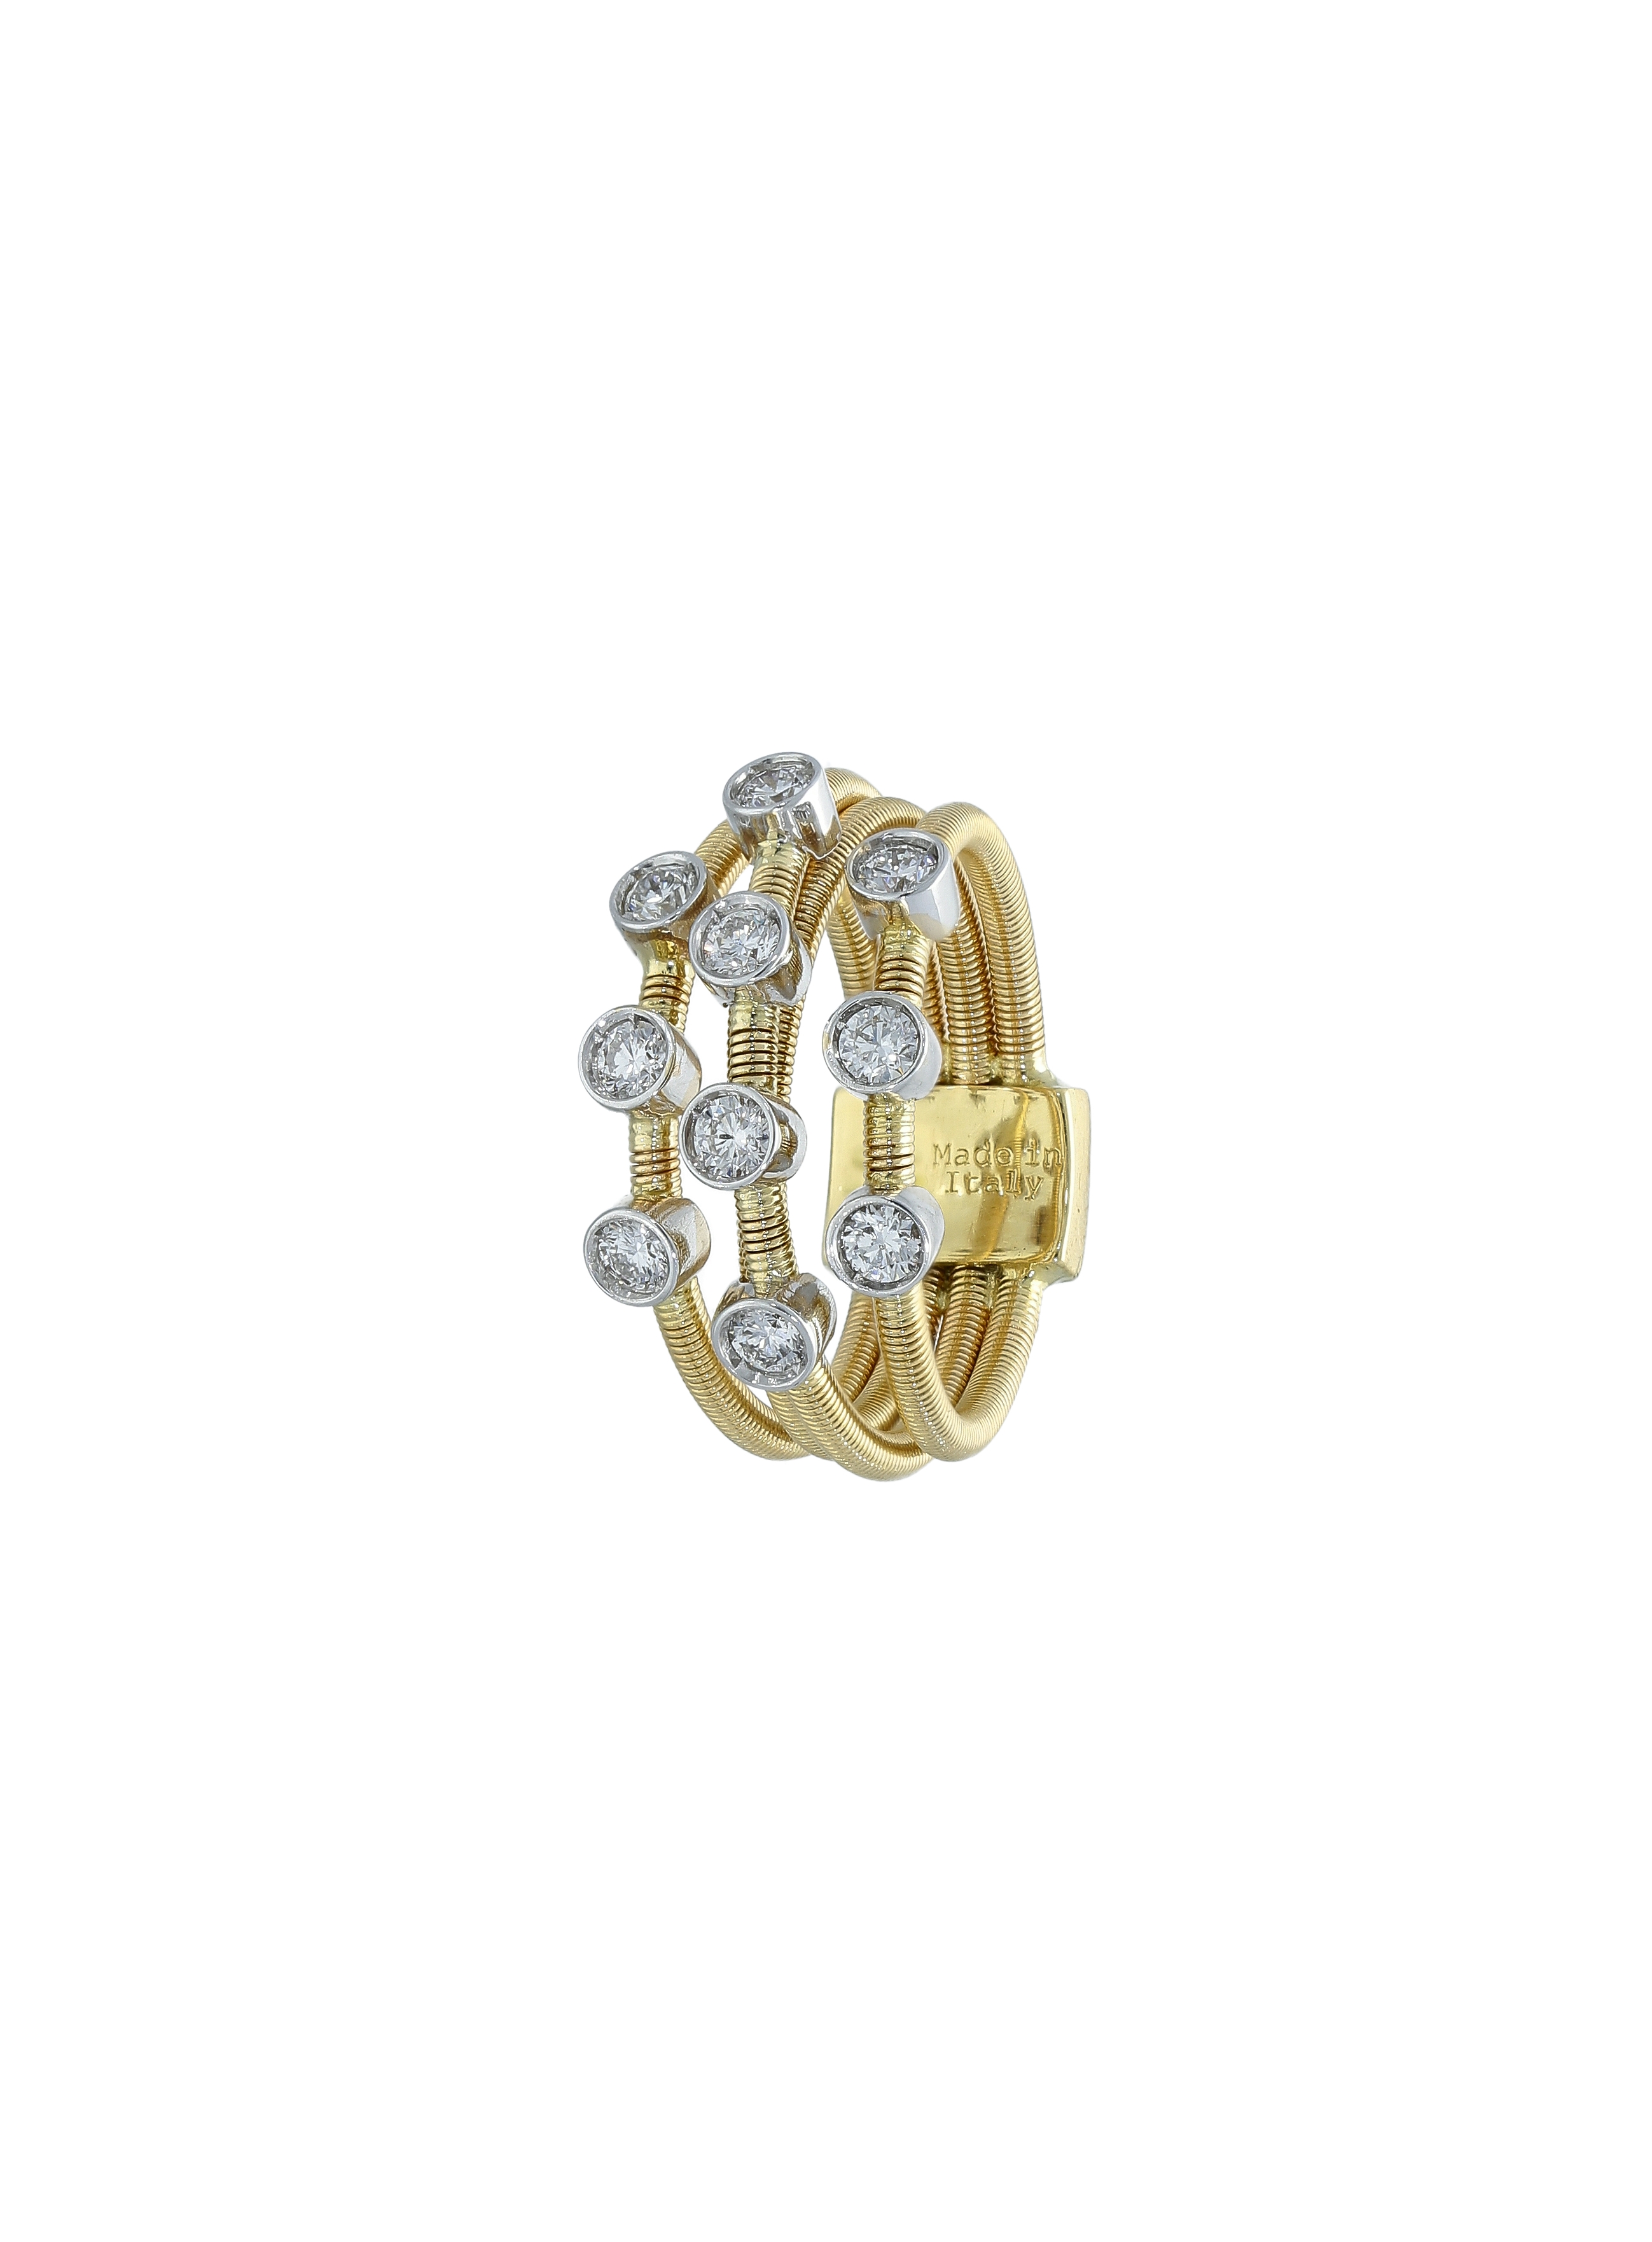 Stellar Strength: Unveiling the Passionate Love Ring - 18KT Gold with Brilliant Diamonds